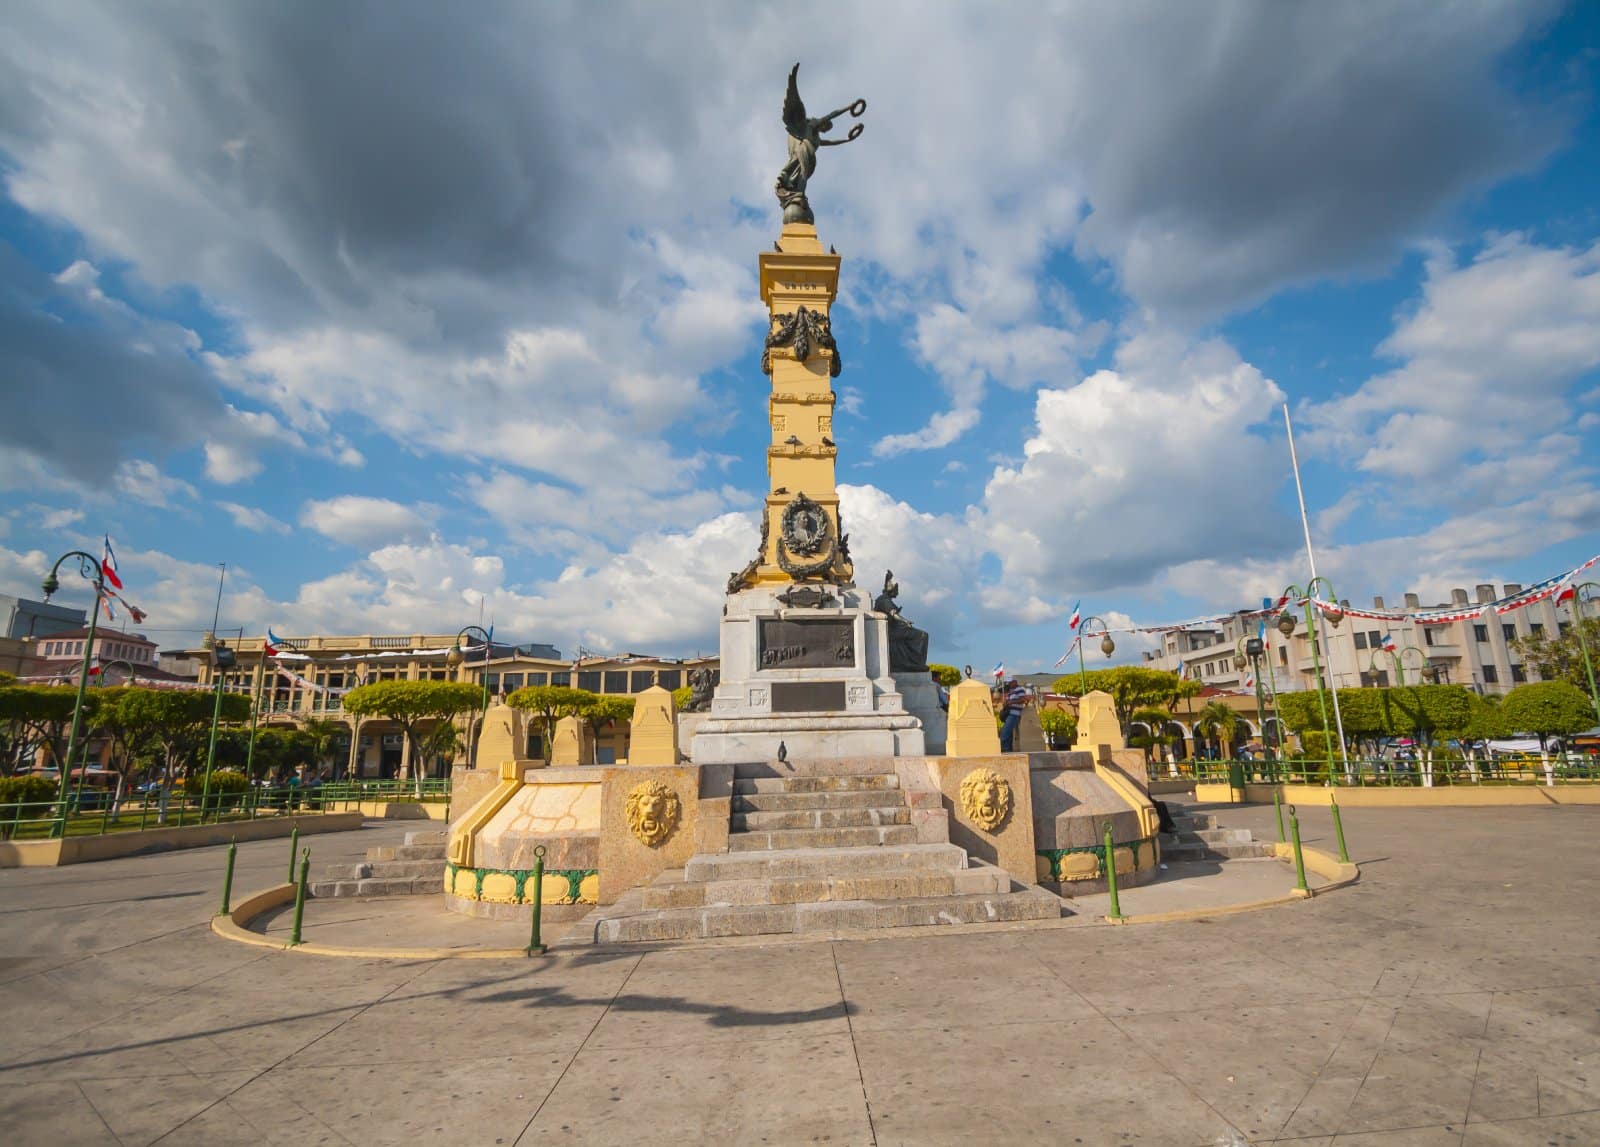 <p><span>El Salvador adopted the U.S. dollar as its official currency in 2001, simplifying transactions for both locals and tourists.</span></p>